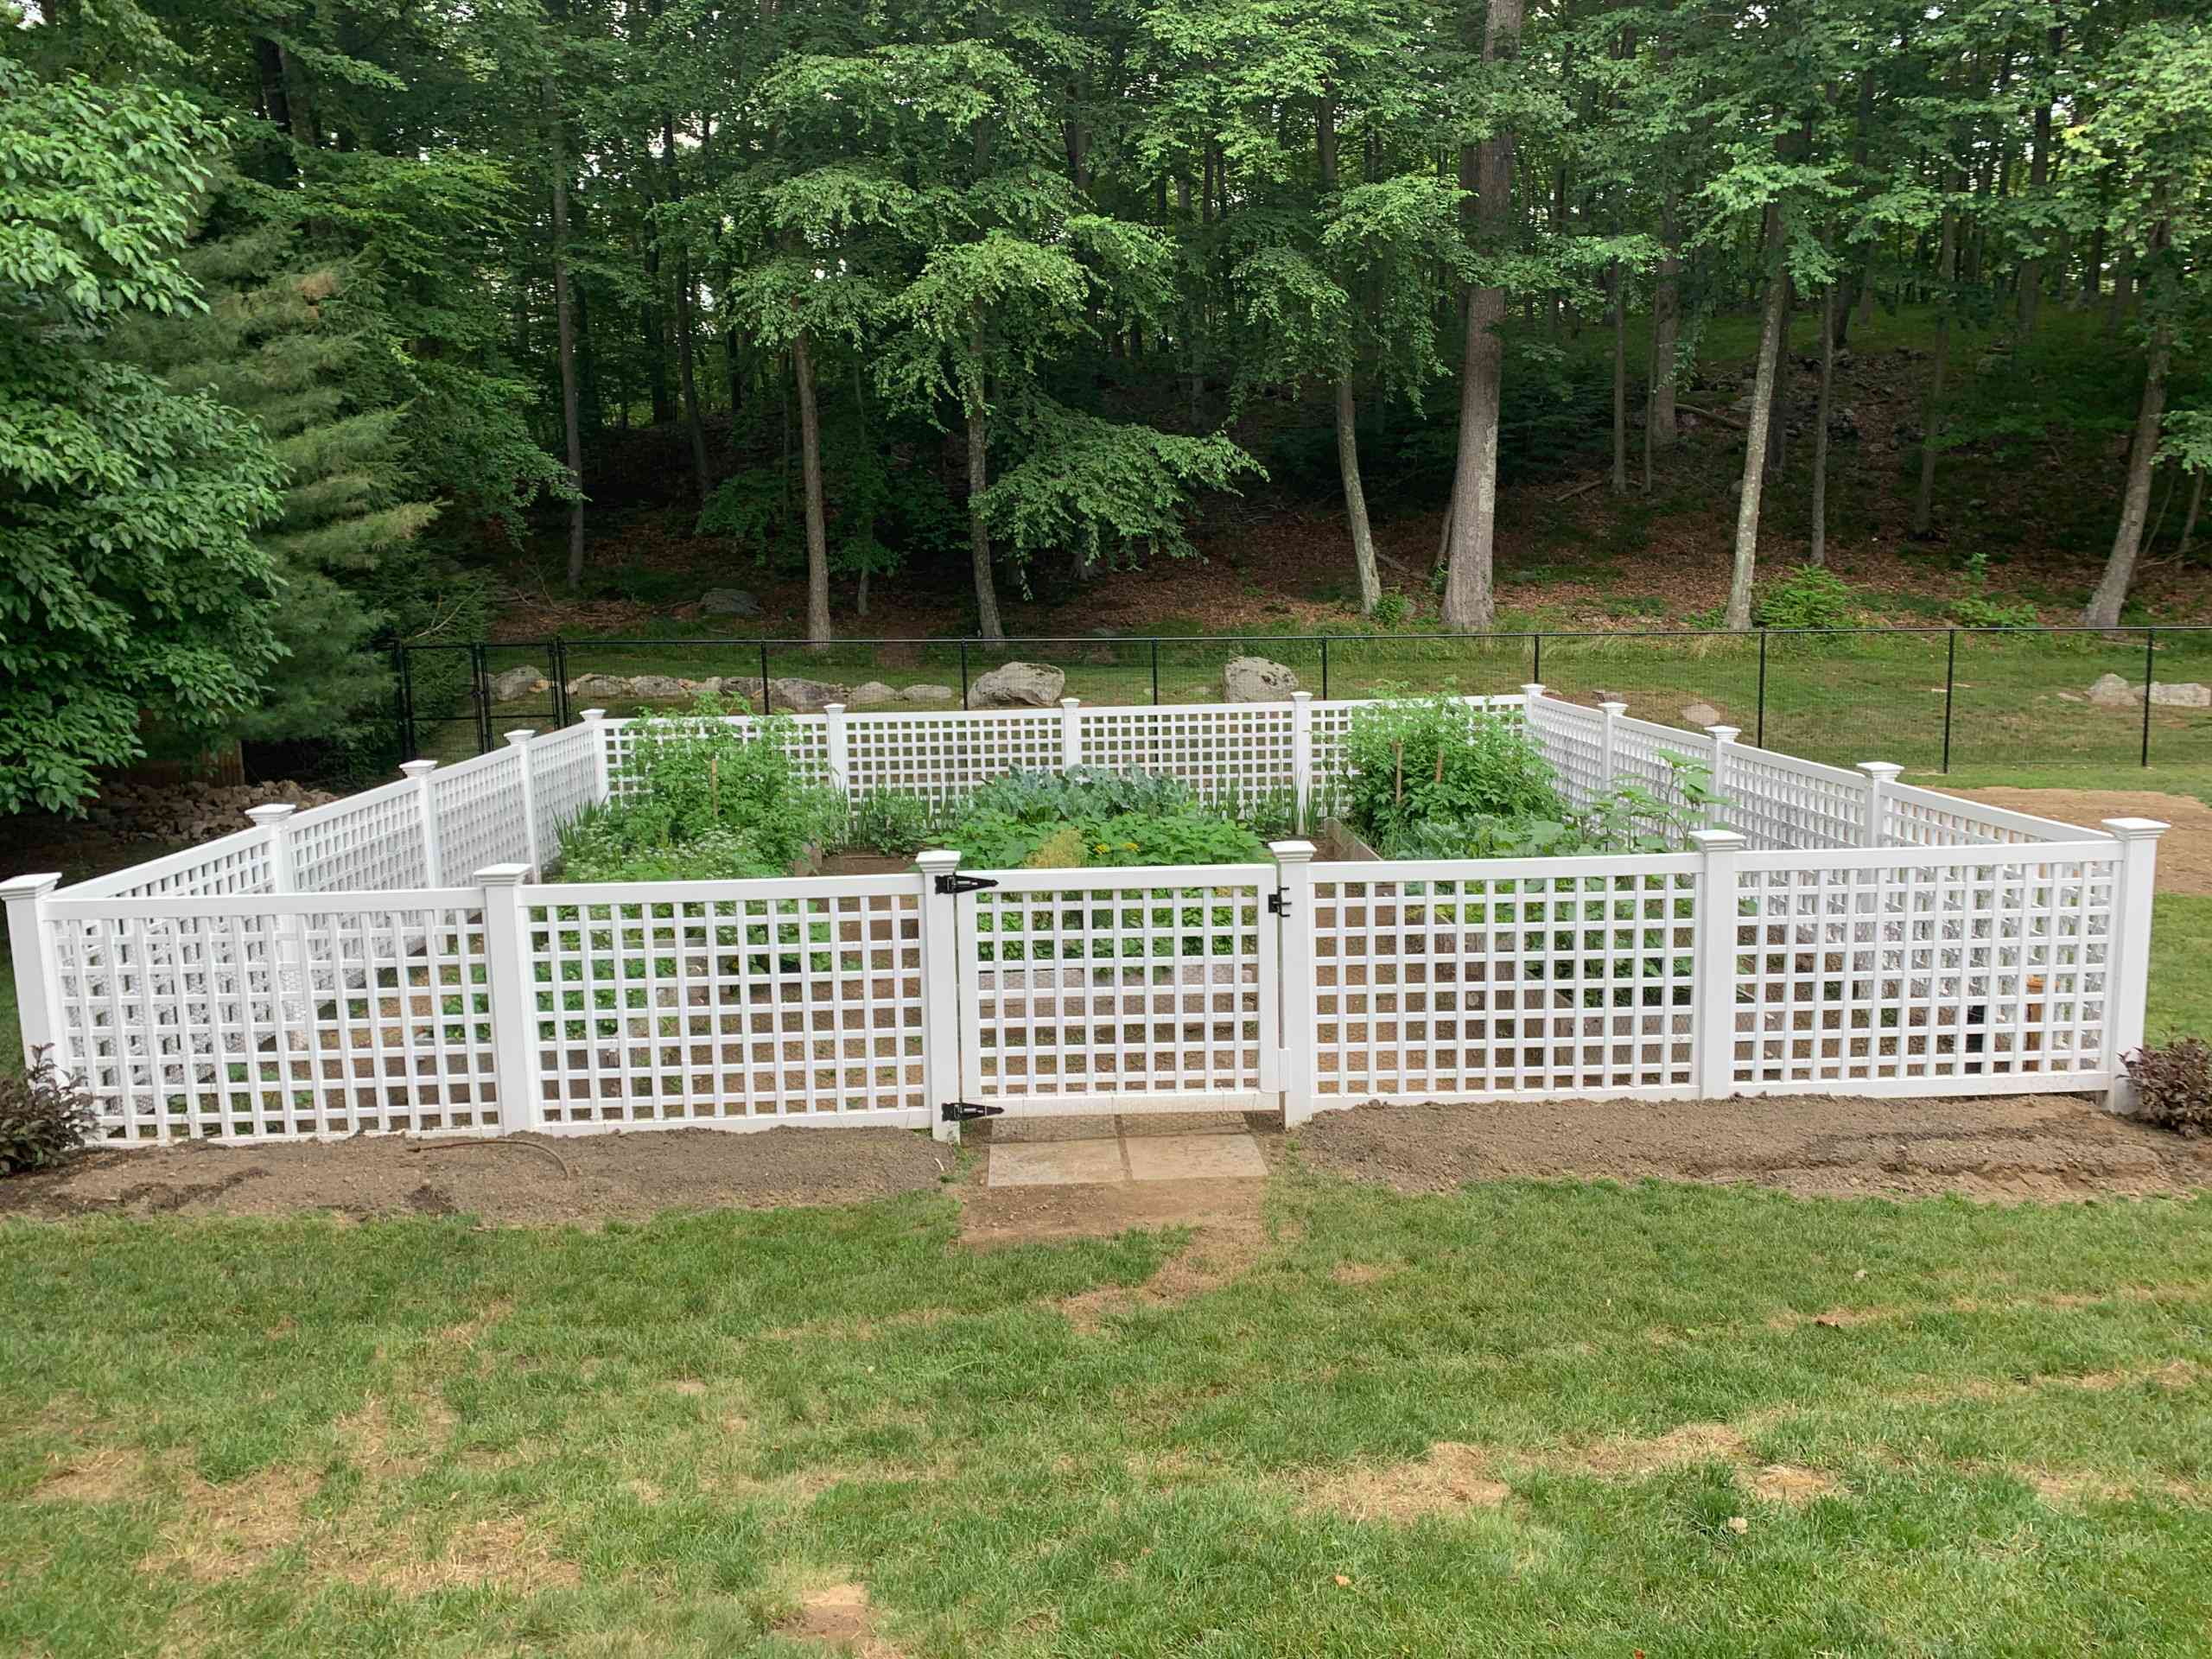 Finished Vegetable Garden System by Peter Atkins